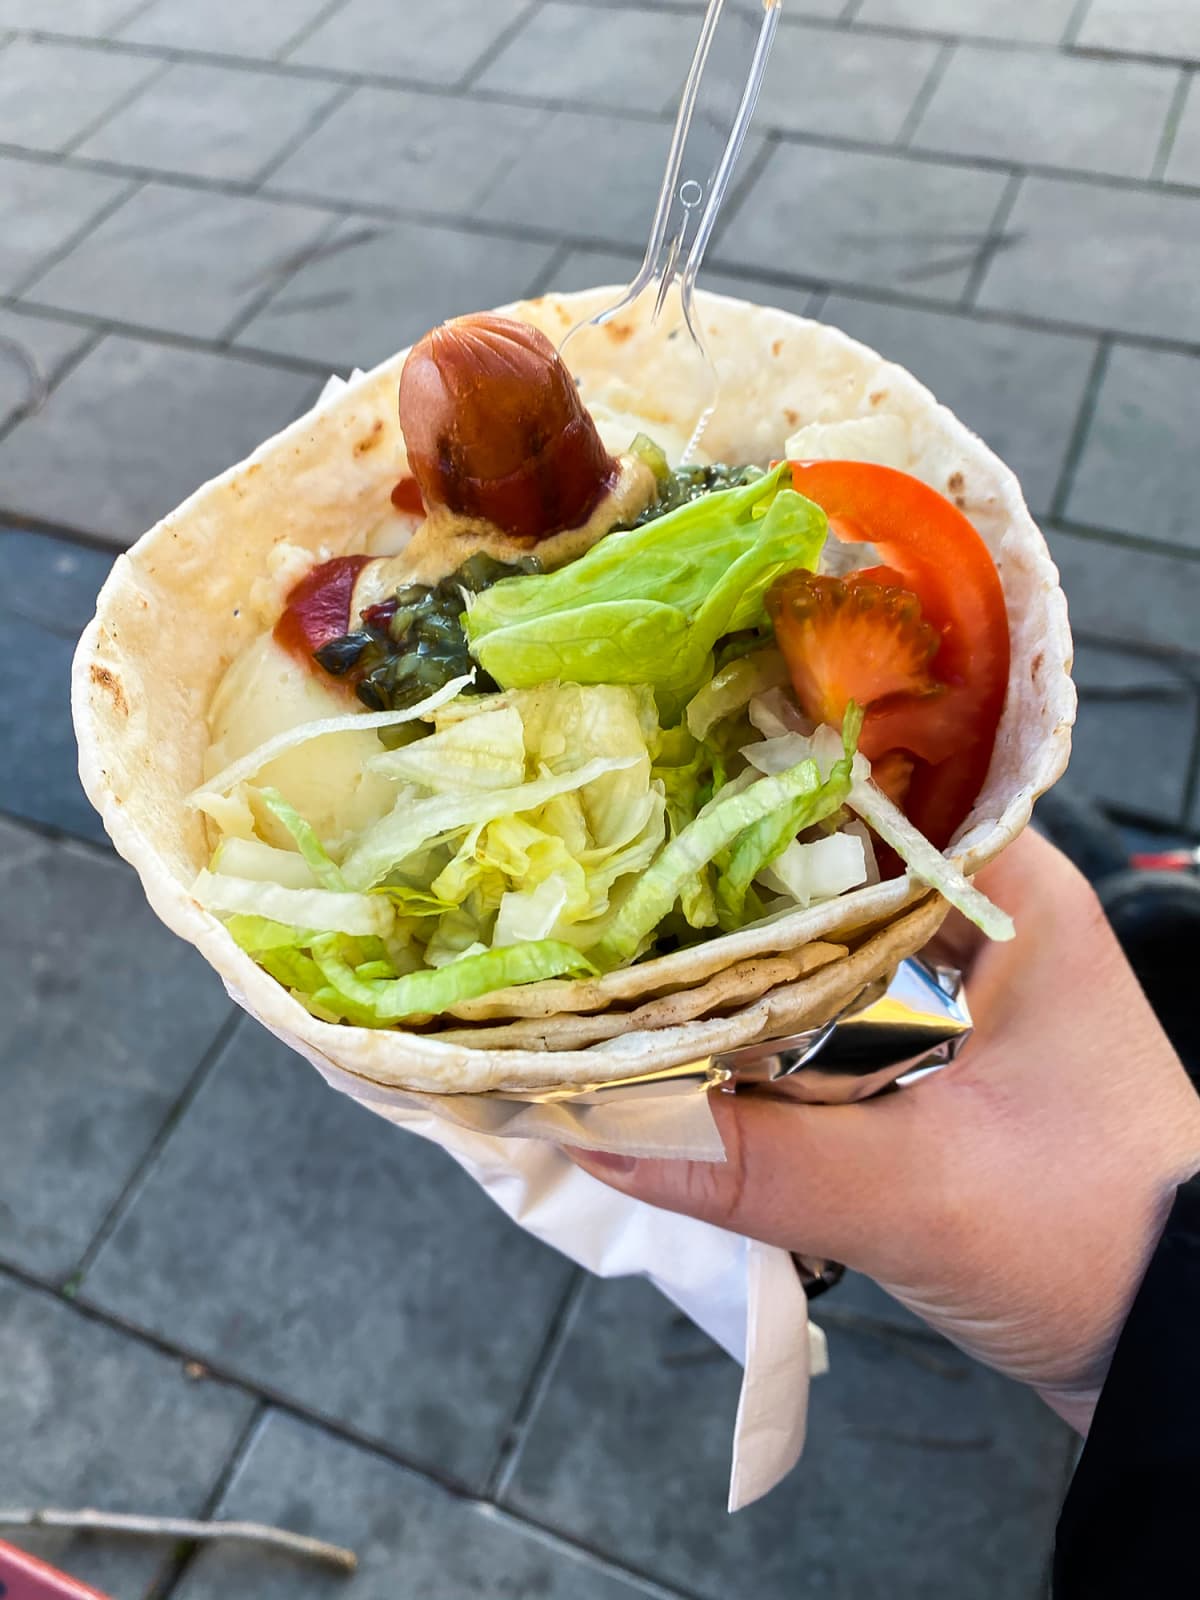 Flatbread wrap with instant mash potatoes, grilled hot dog and salad. Swedish fast food.